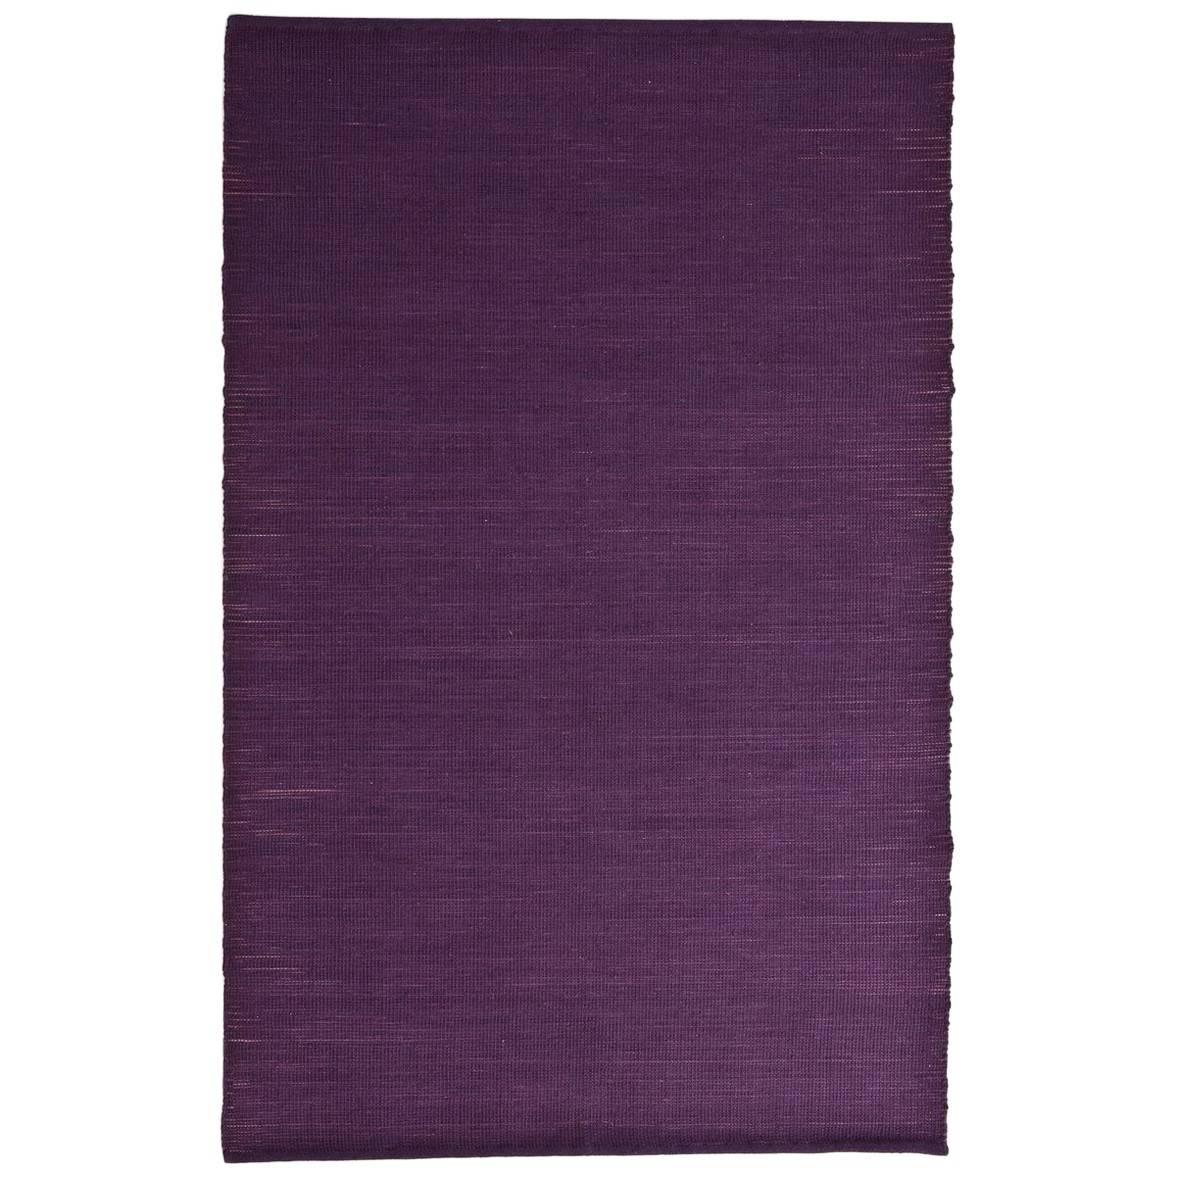 Tatami Purple Wool and Jute Rug by Nani Marquina & Ariadna Miquel Large